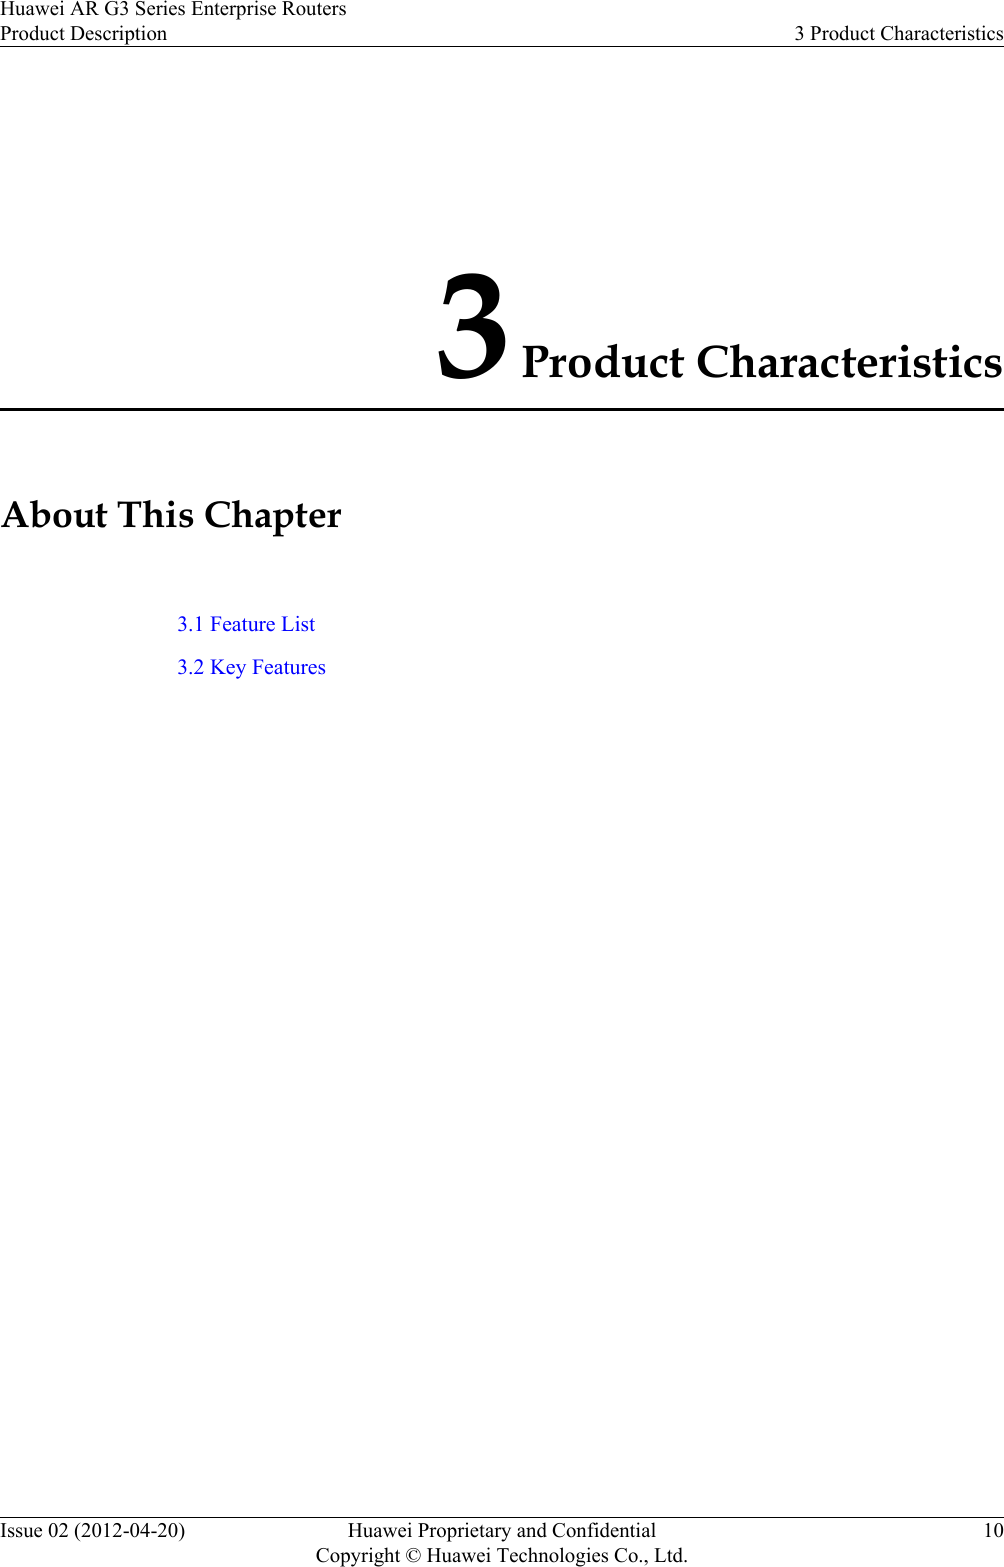 3 Product CharacteristicsAbout This Chapter3.1 Feature List3.2 Key FeaturesHuawei AR G3 Series Enterprise RoutersProduct Description 3 Product CharacteristicsIssue 02 (2012-04-20) Huawei Proprietary and ConfidentialCopyright © Huawei Technologies Co., Ltd.10